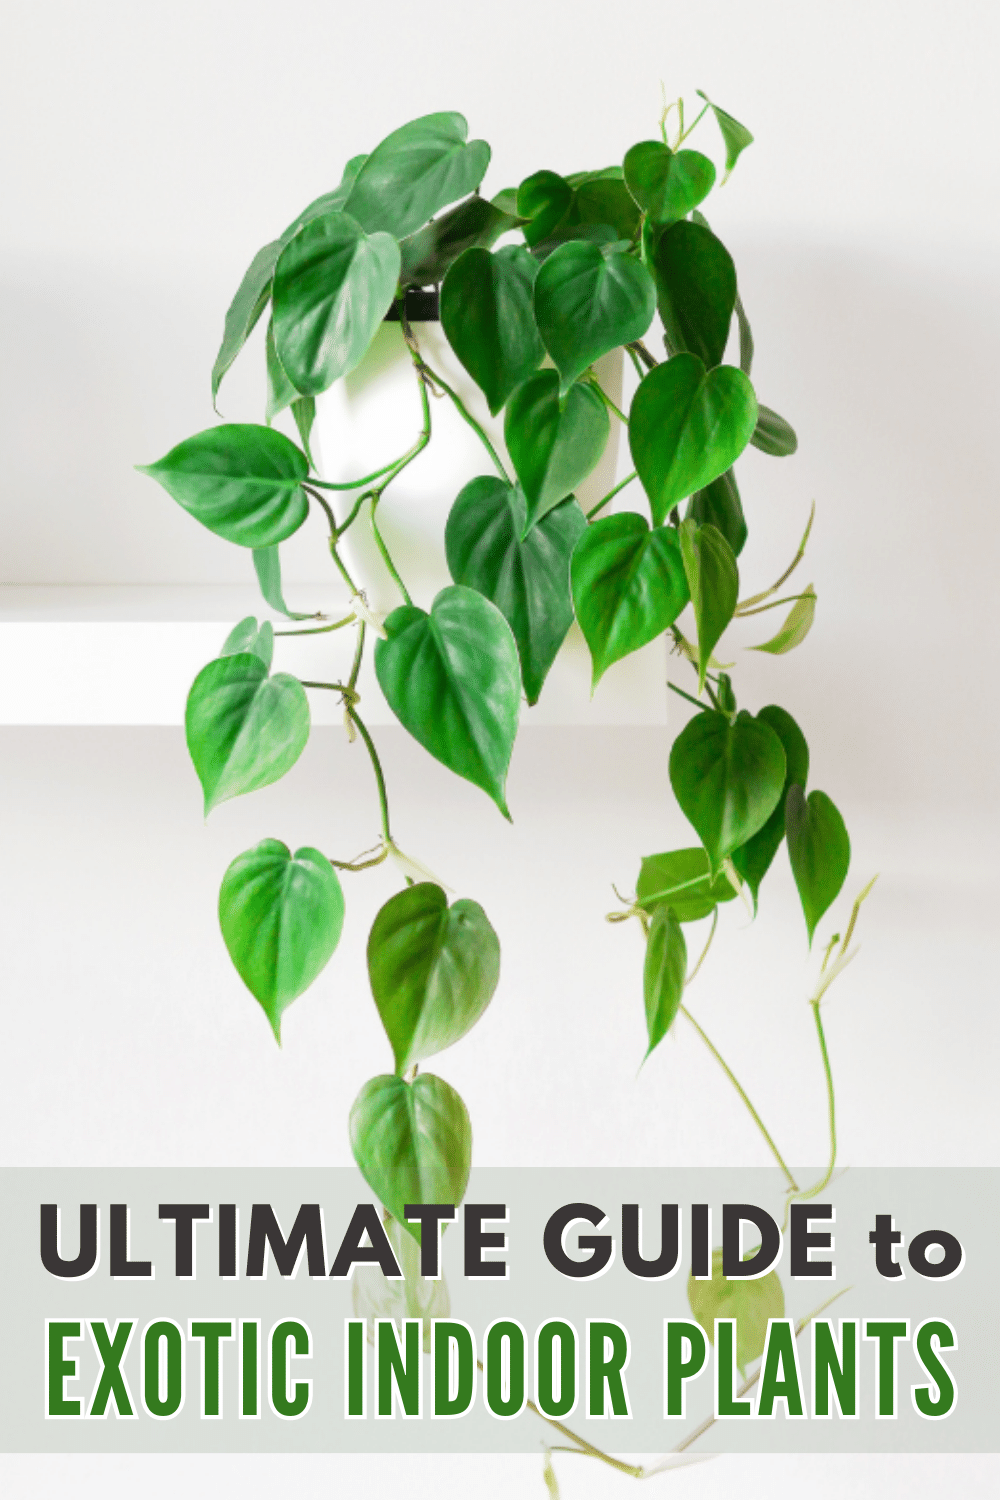 The ultimate guide to exotic indoor plants.